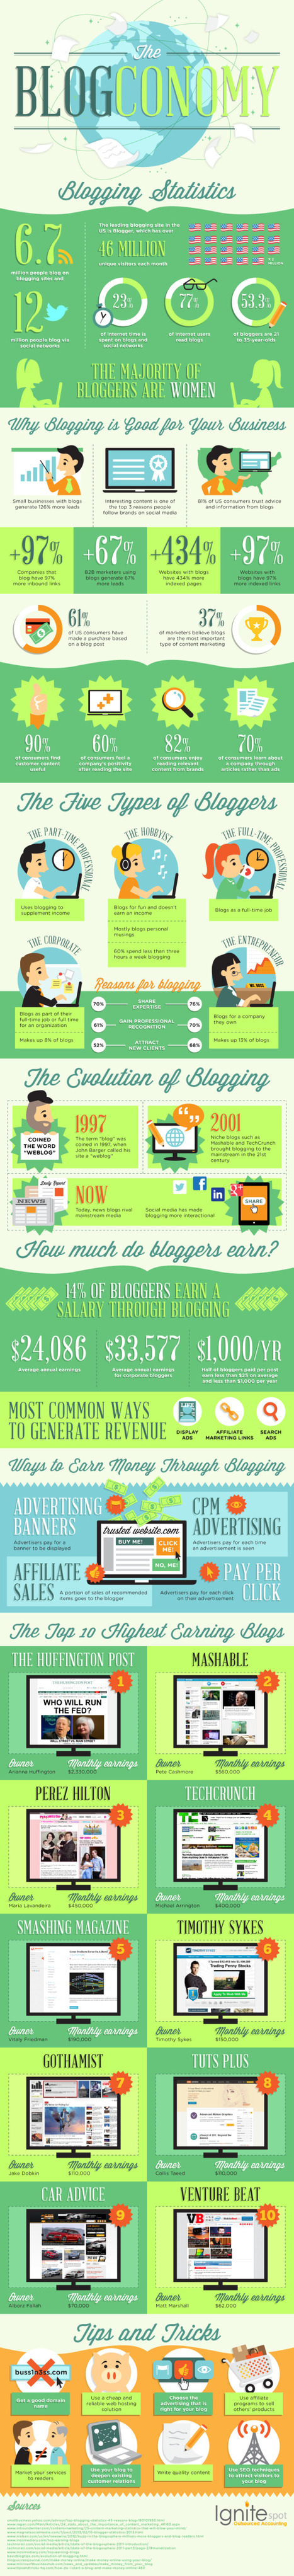 Infographic: The Blogconomy and Blogging Stats | World's Best Infographics | Scoop.it